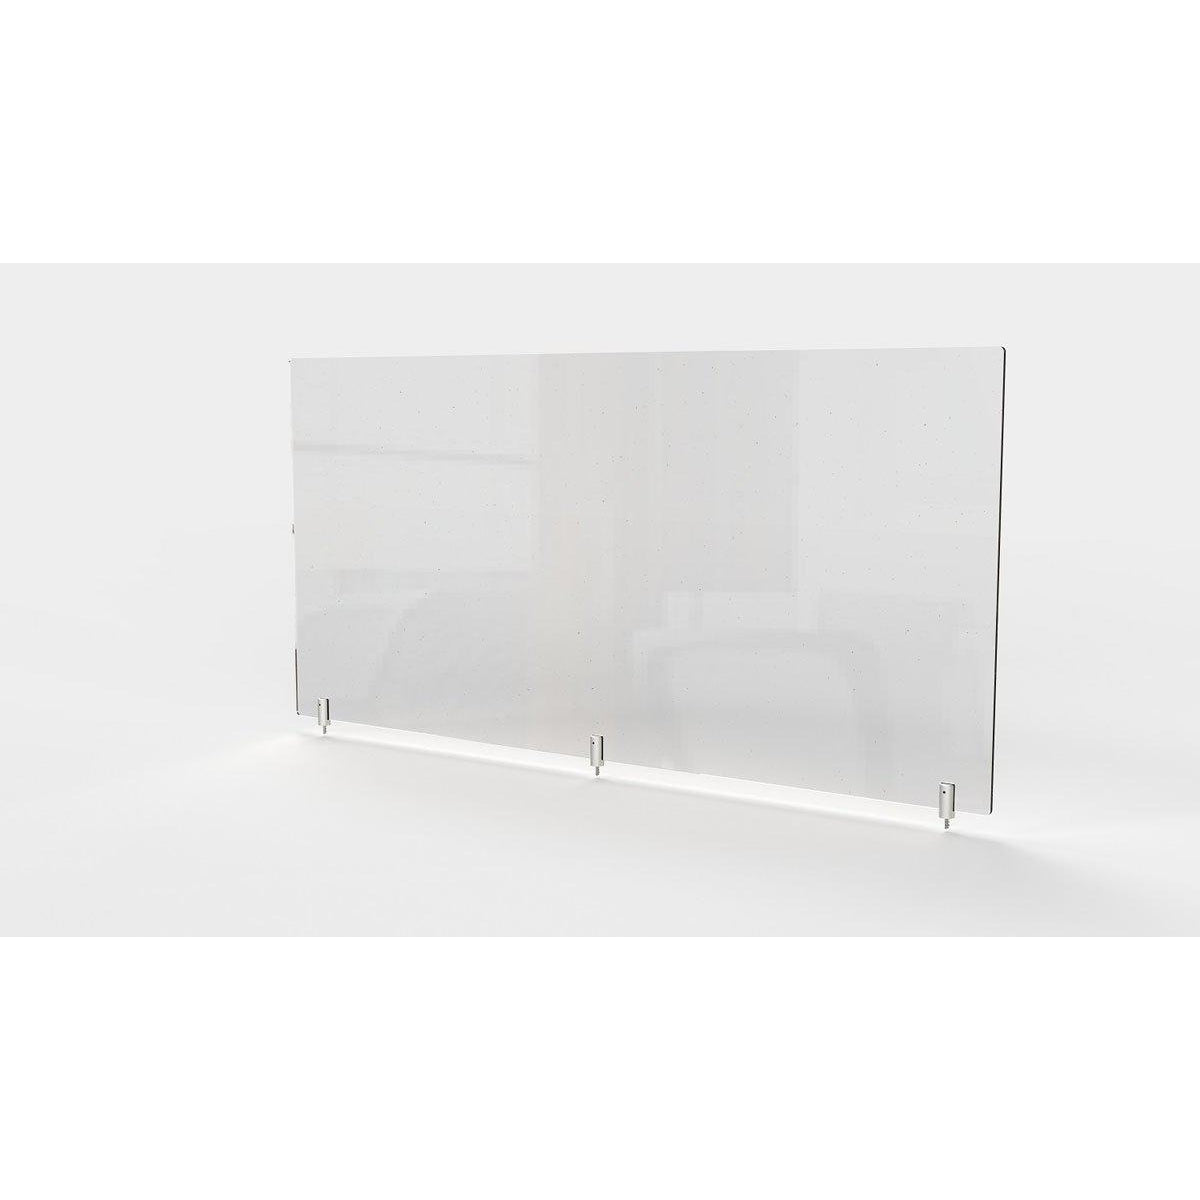 Clear Thermoplastic Partition & Cubicle Extender with Permanent Screw Attachment, 24"H x 59"W